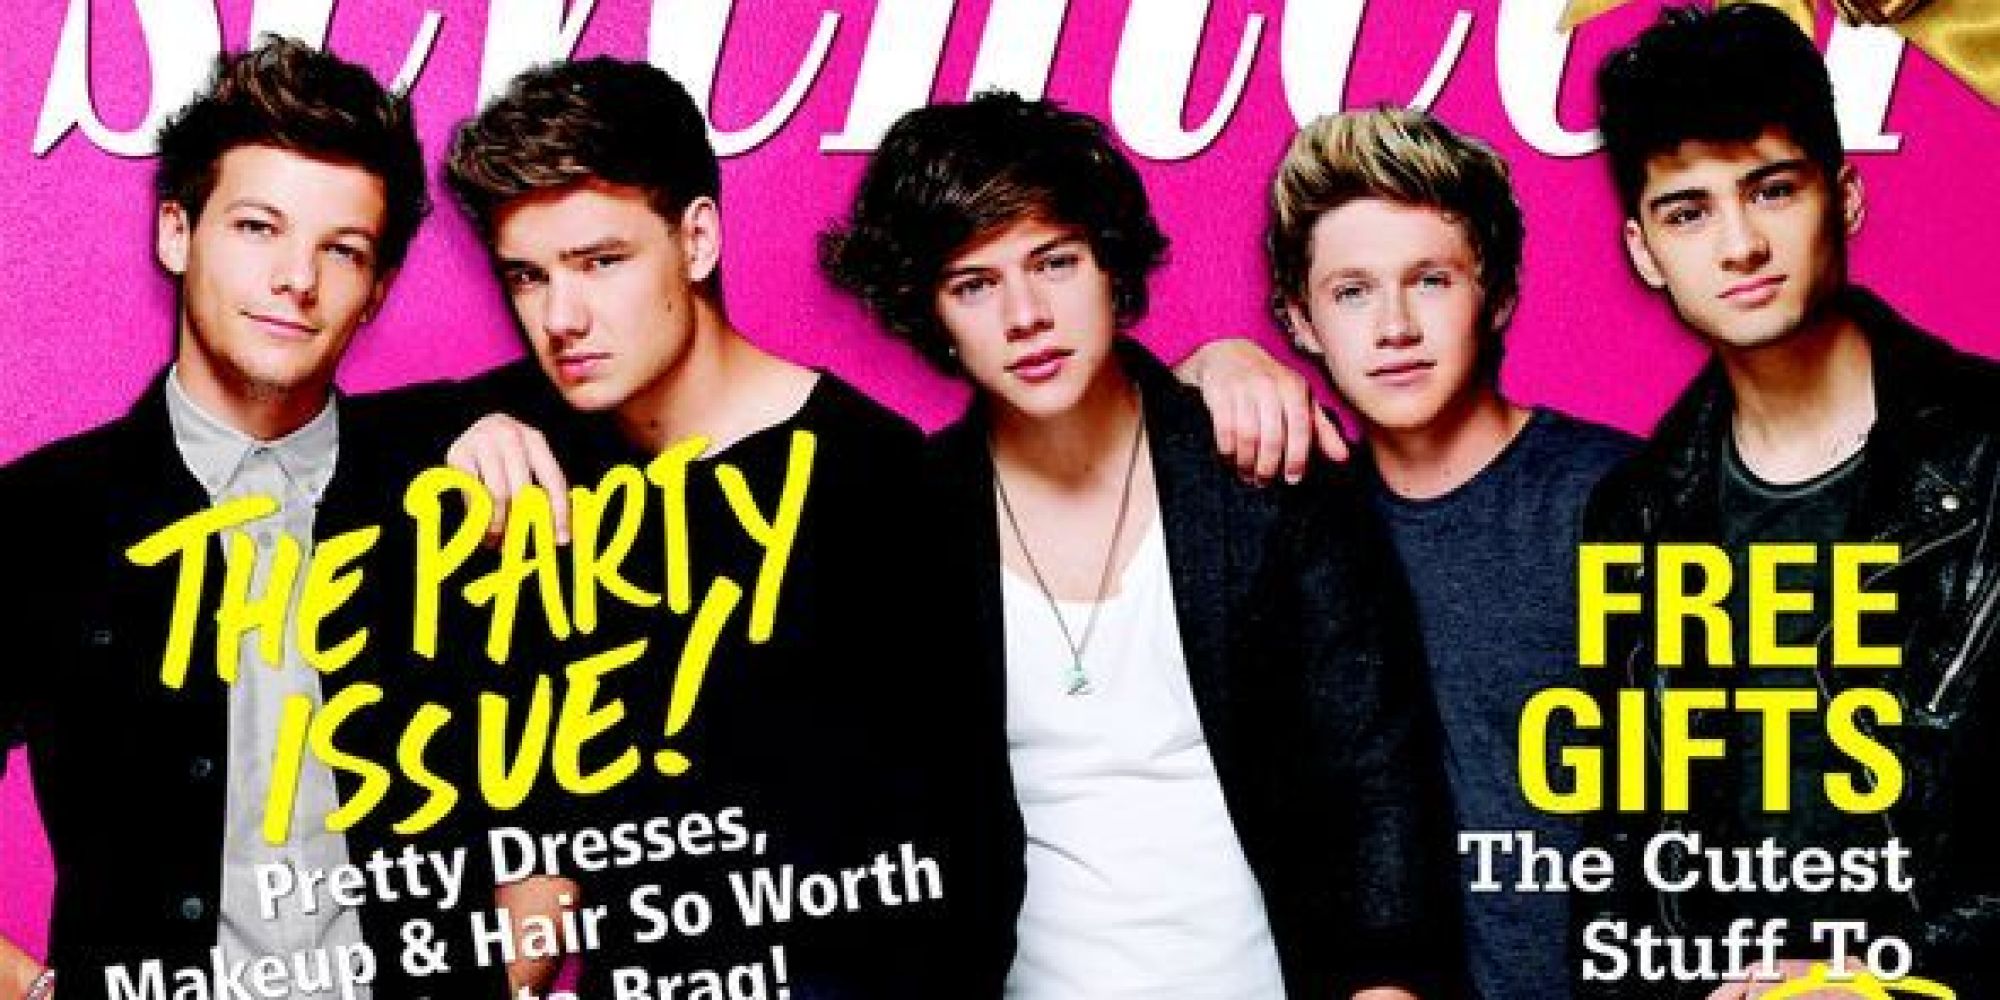 One Direction Cover Seventeen Magazine, Talk Pranks On The Road And